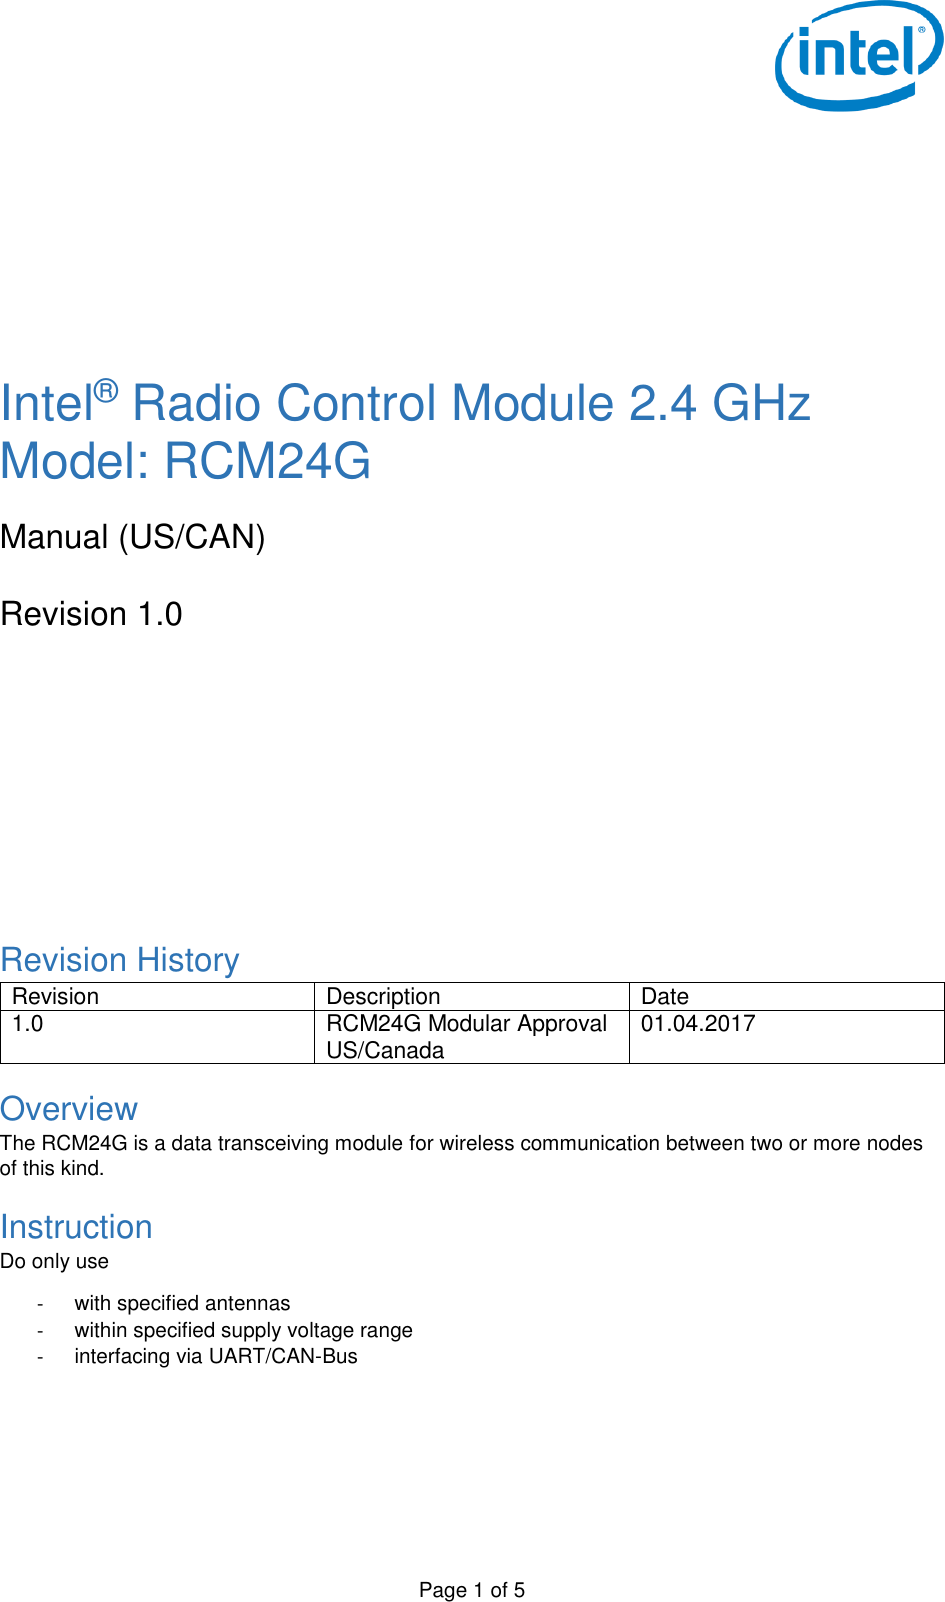   Page 1 of 5        Intel® Radio Control Module 2.4 GHz Model: RCM24G  Manual (US/CAN)  Revision 1.0        Revision History Revision Description Date 1.0 RCM24G Modular Approval US/Canada 01.04.2017 Overview The RCM24G is a data transceiving module for wireless communication between two or more nodes of this kind. Instruction Do only use  -  with specified antennas -  within specified supply voltage range -  interfacing via UART/CAN-Bus   